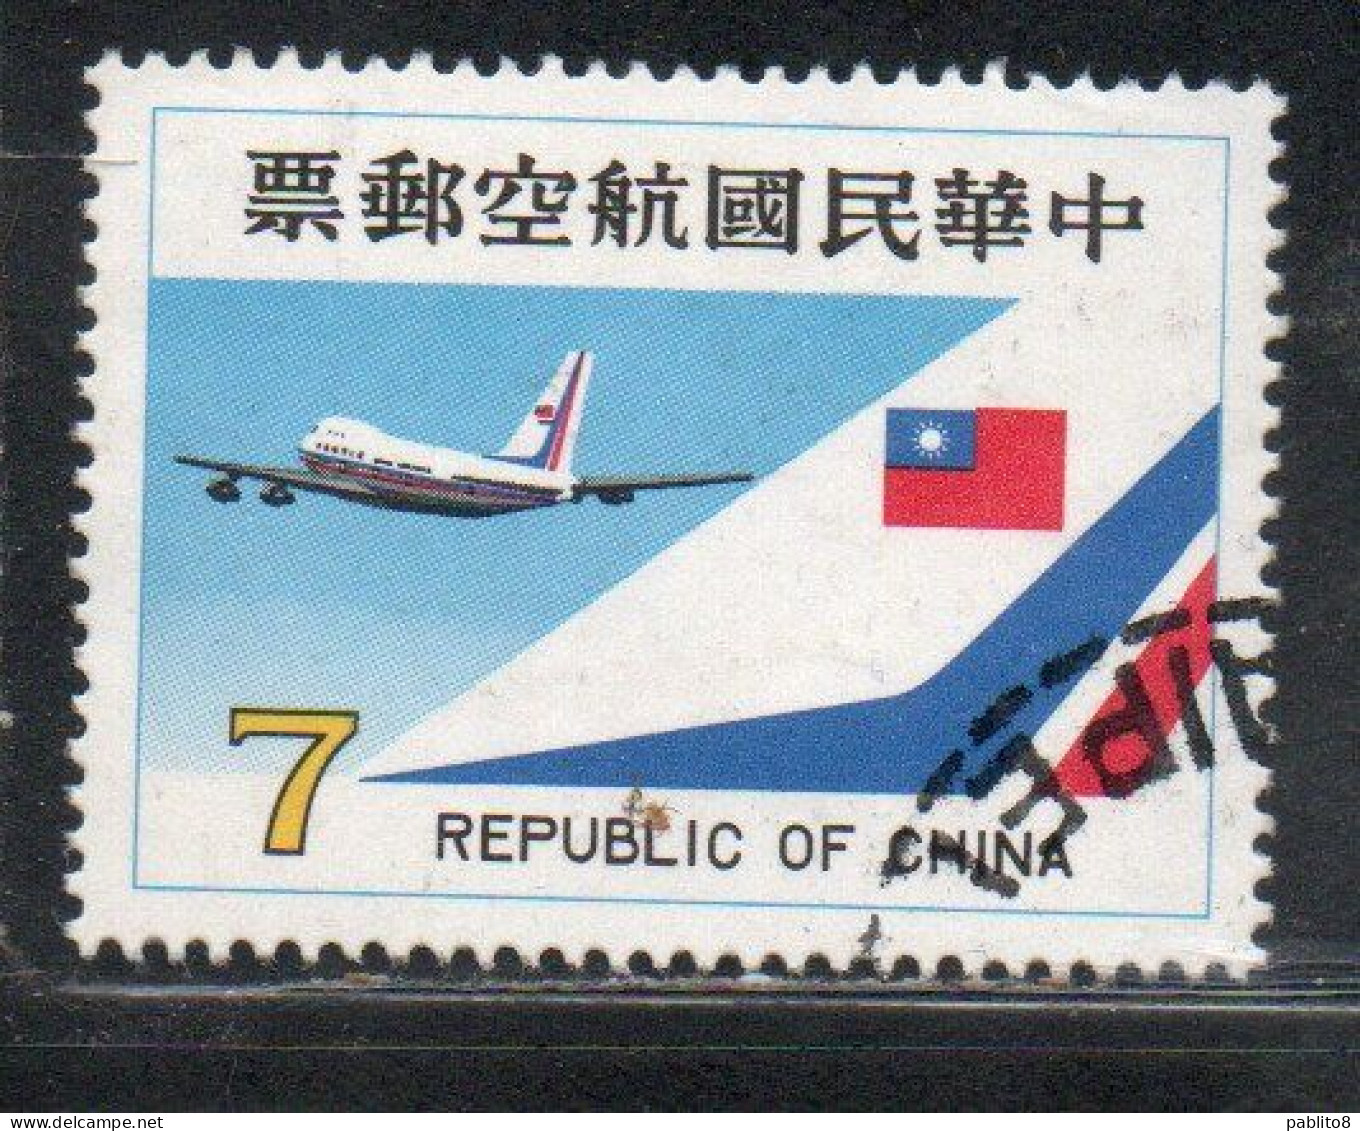 CHINA REPUBLIC CINA TAIWAN FORMOSA 1980 AIR POST MAIL AIRMAIL CHINA AIRLINES JET 7$ USED USATO OBLITERE' - Airmail